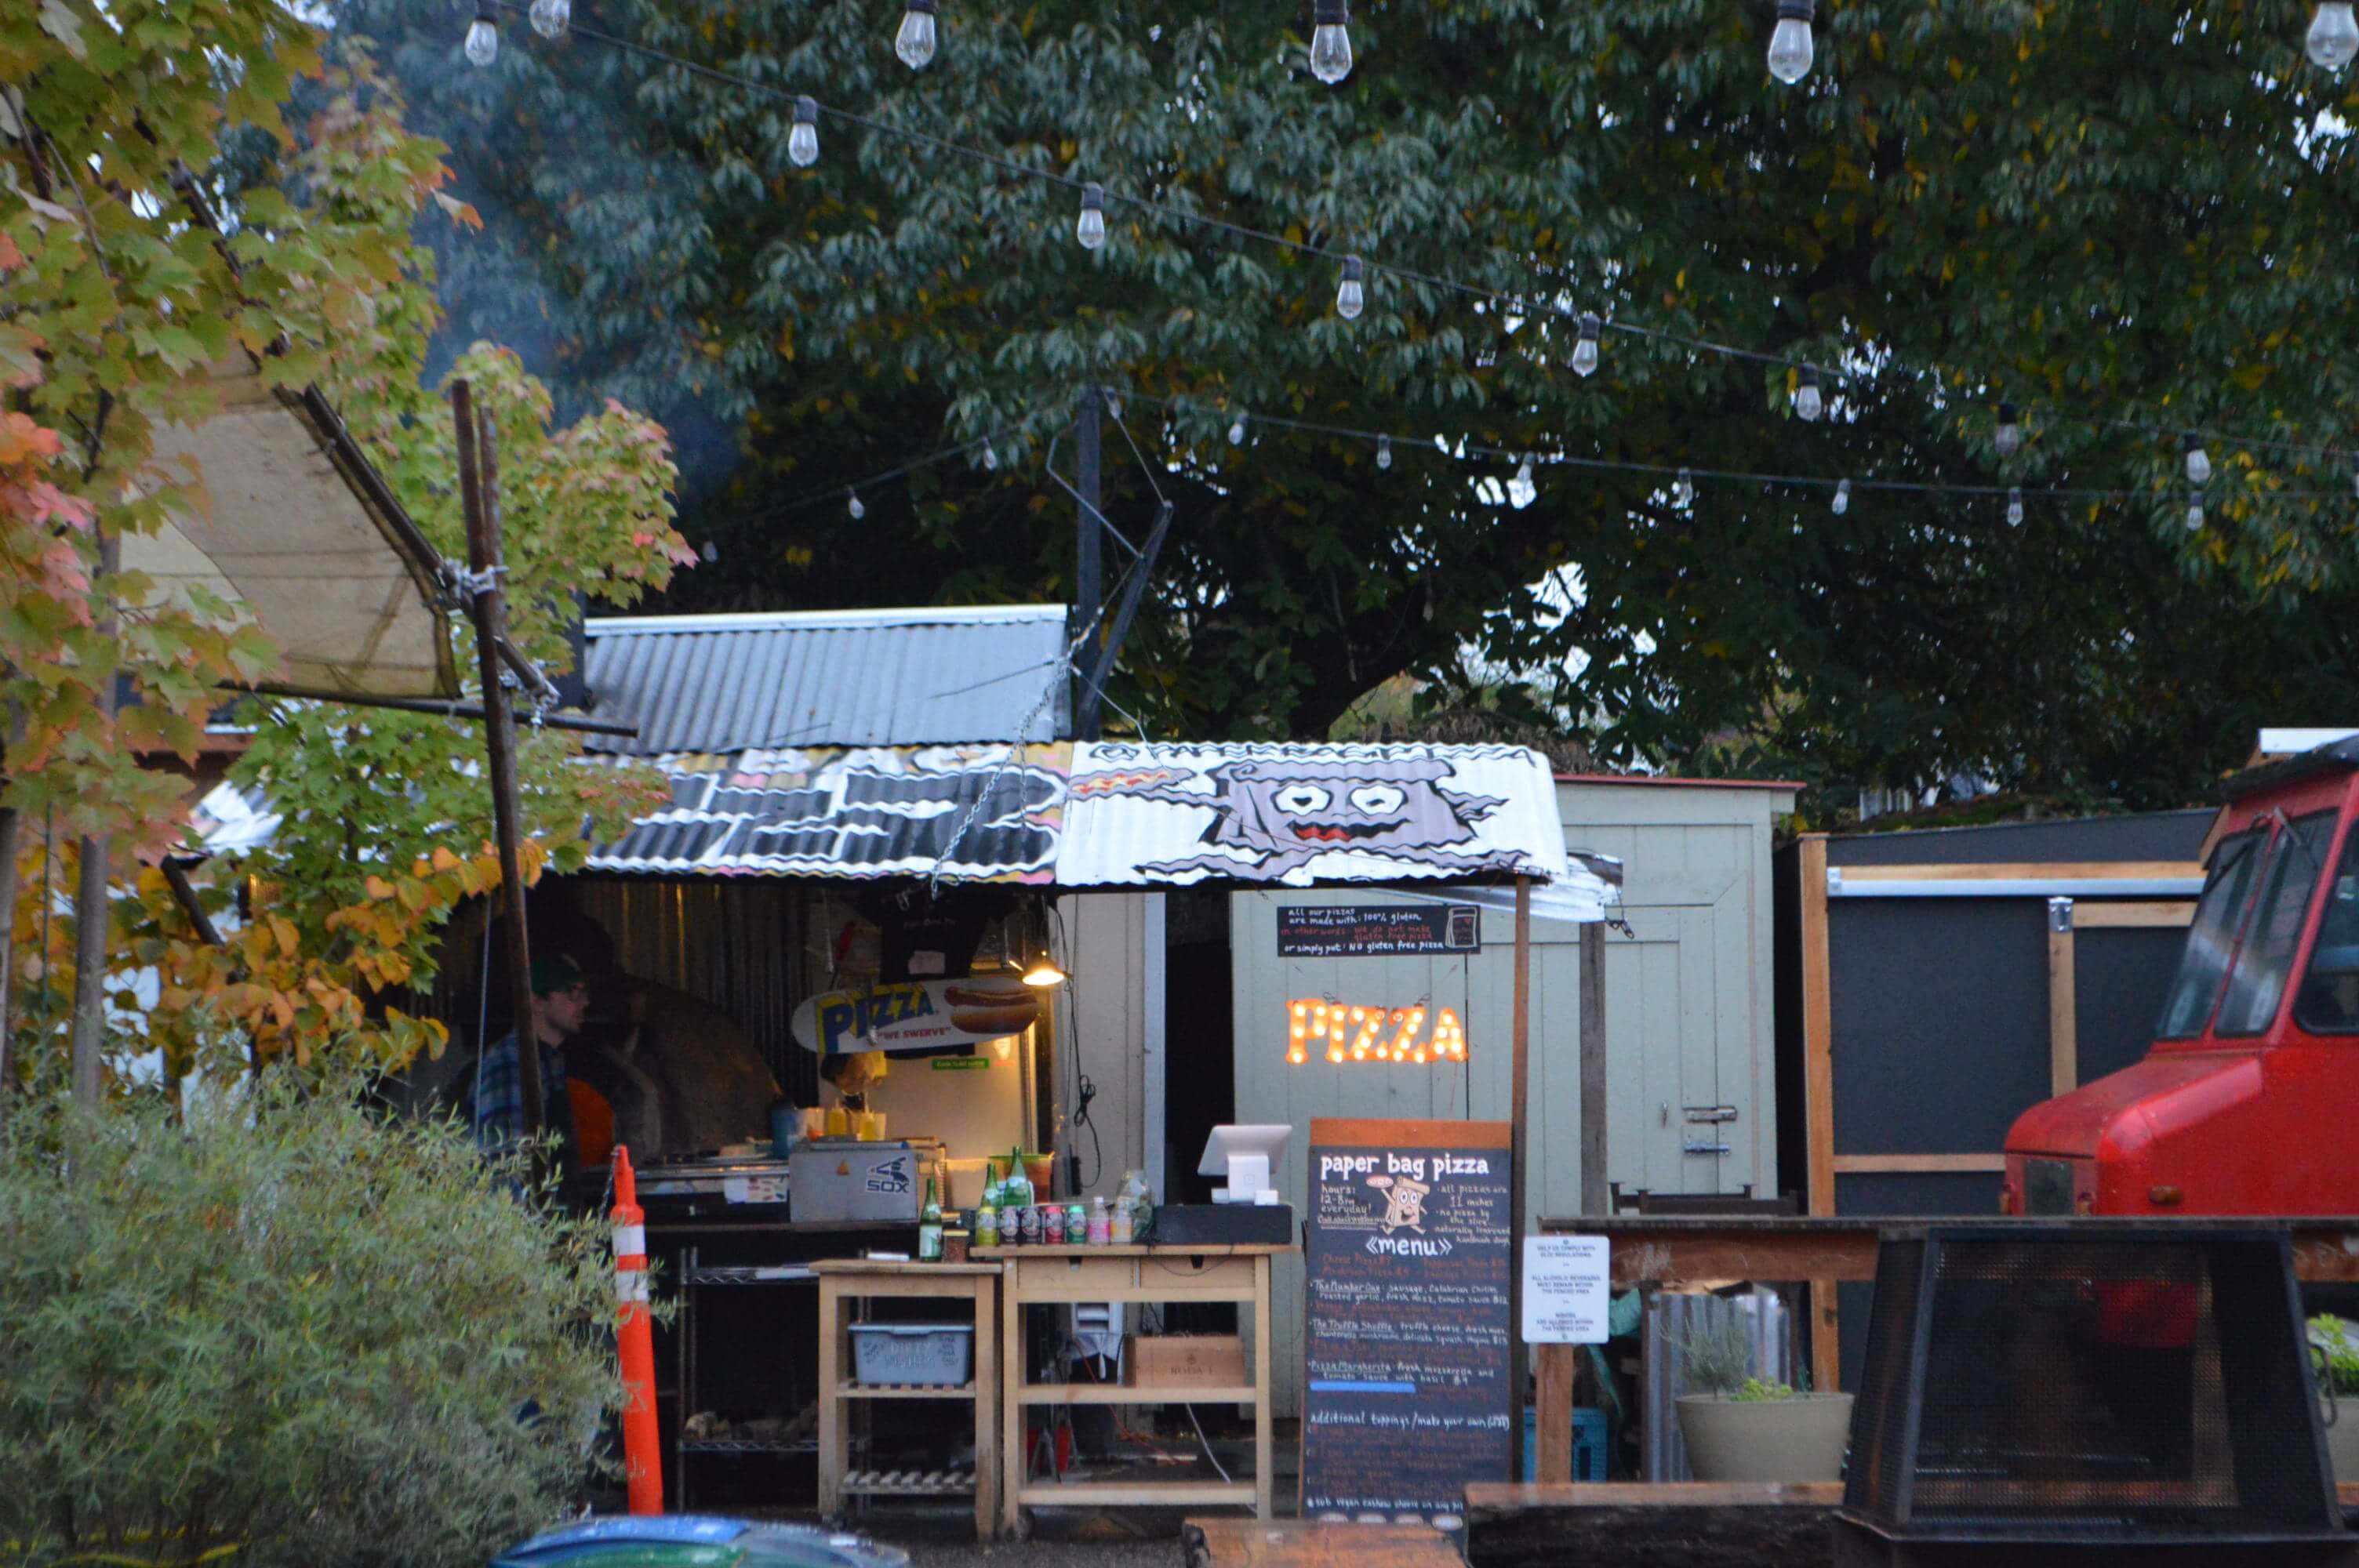 Why+Portland%3F+Food+Carts+Offer+a+Delicious%2C+Cheap+Choice